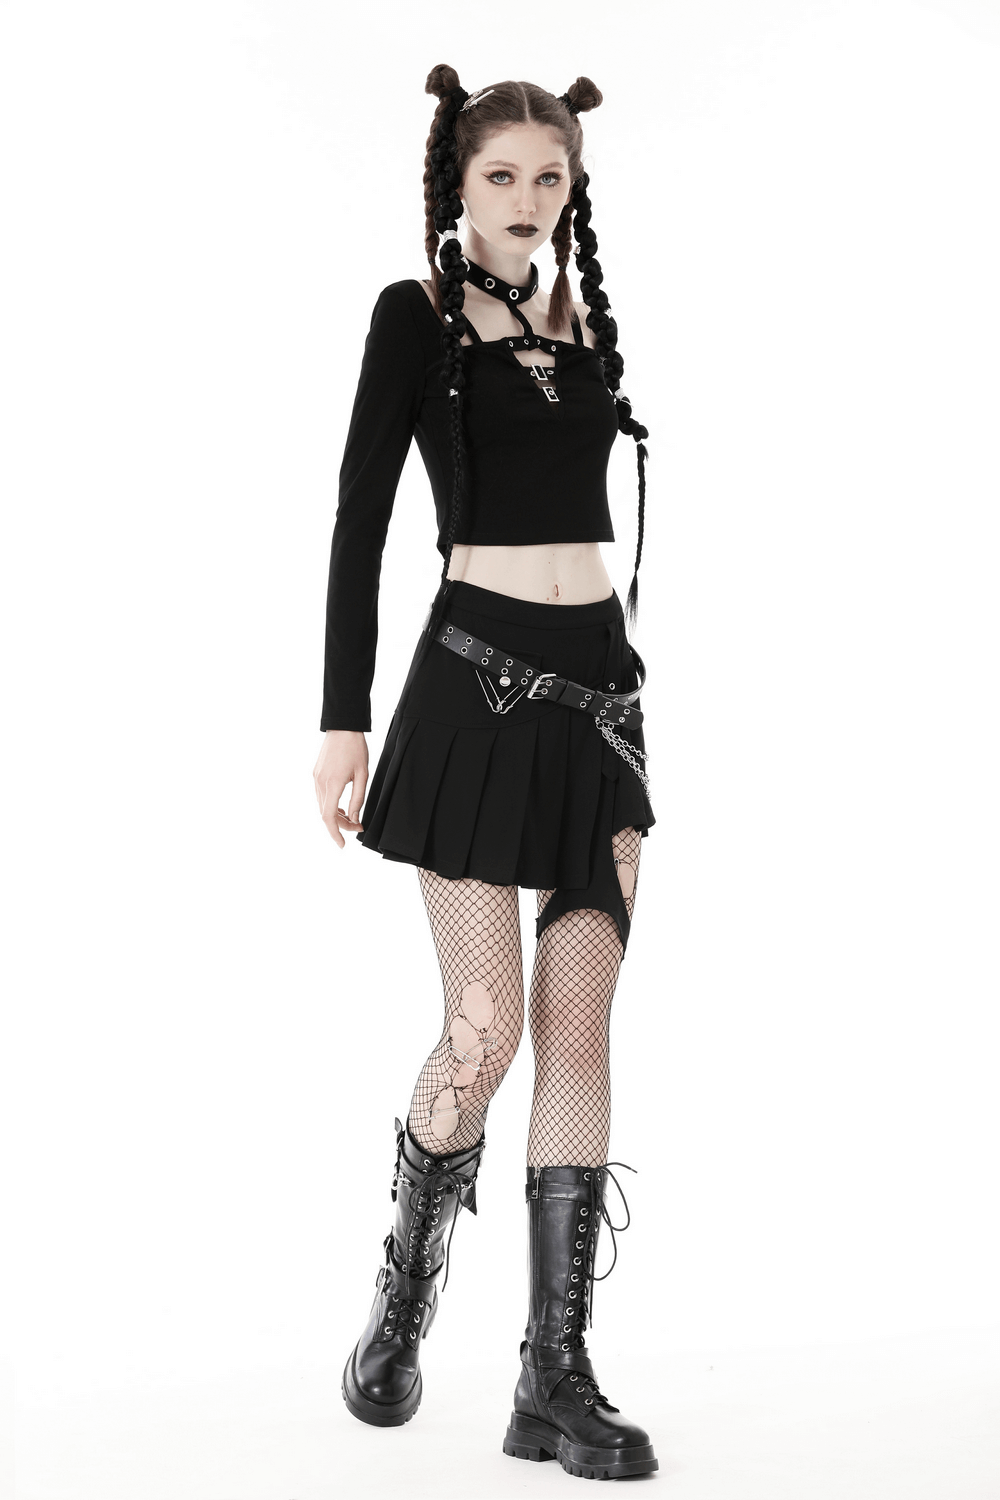 Gothic Black Crop Top with Metal Accents And Long Sleeves